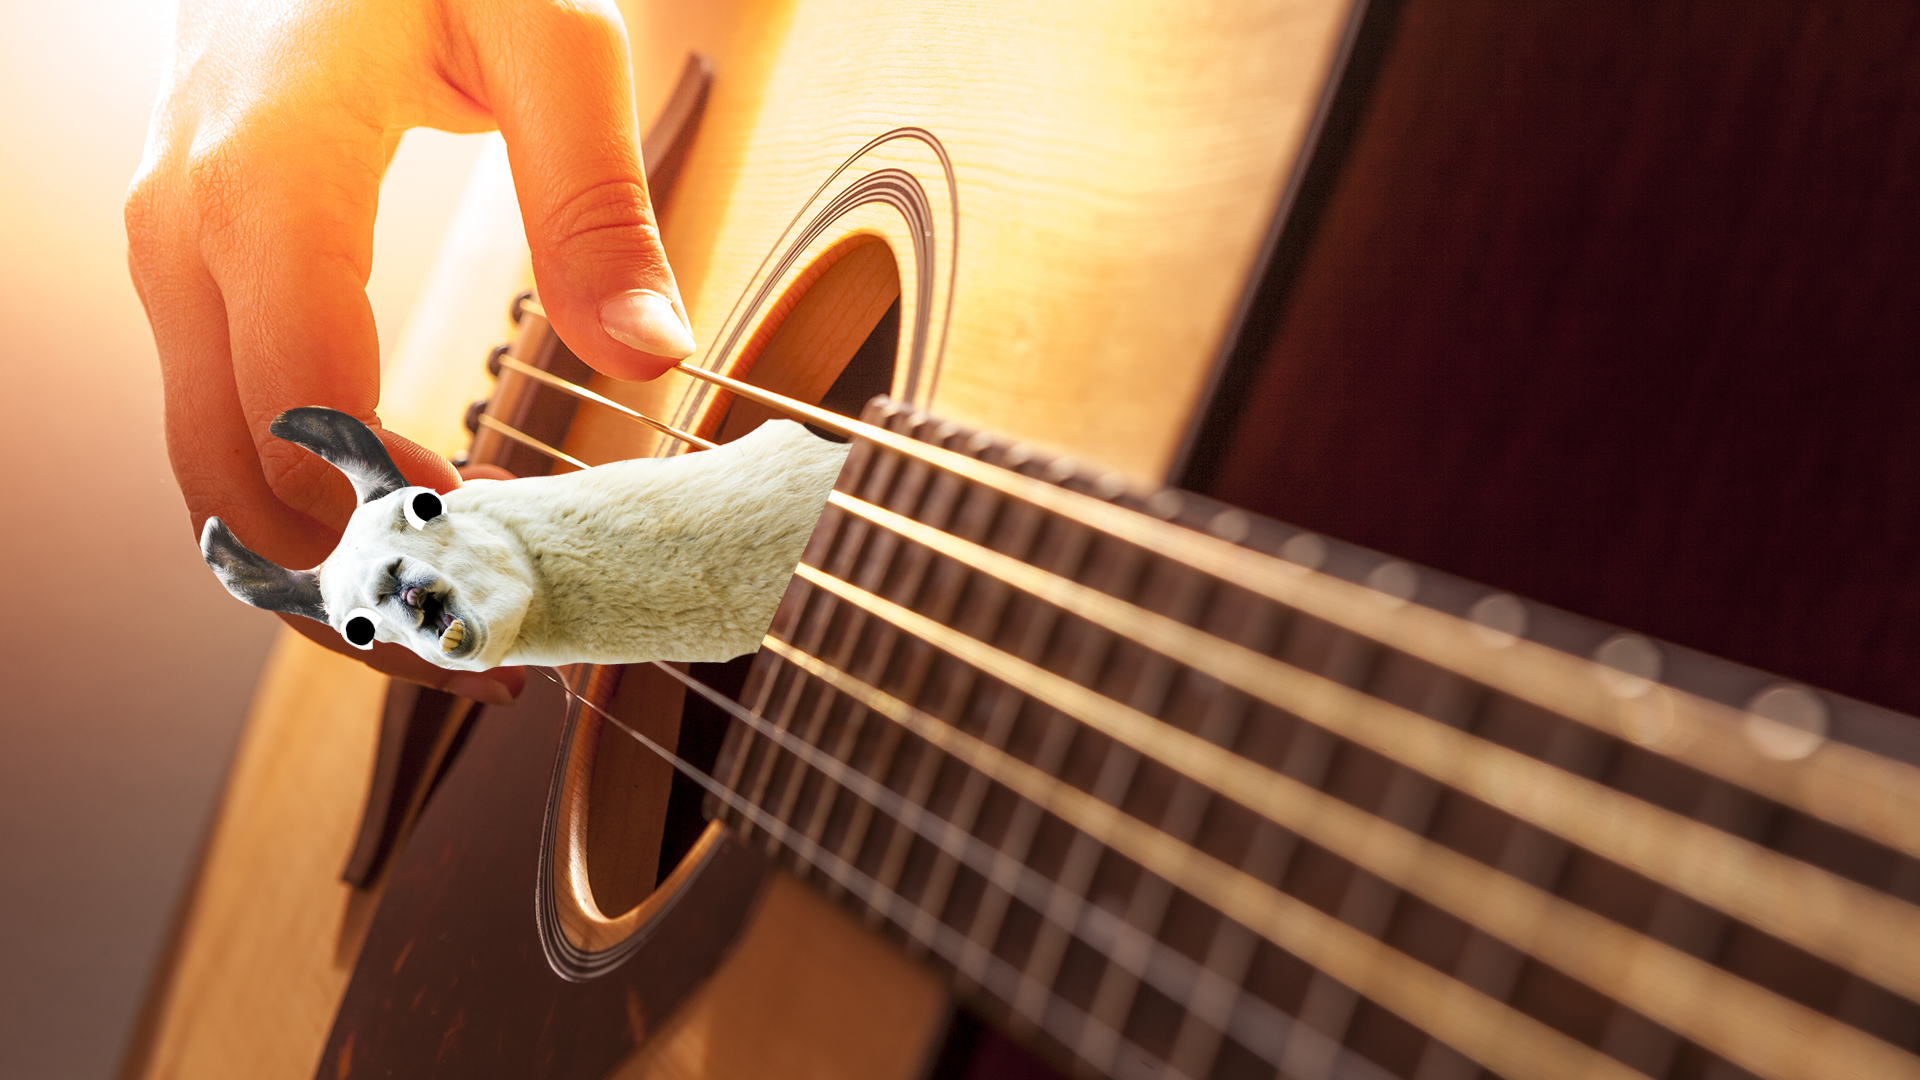 Hand playing guitar while llama pops out of guitar